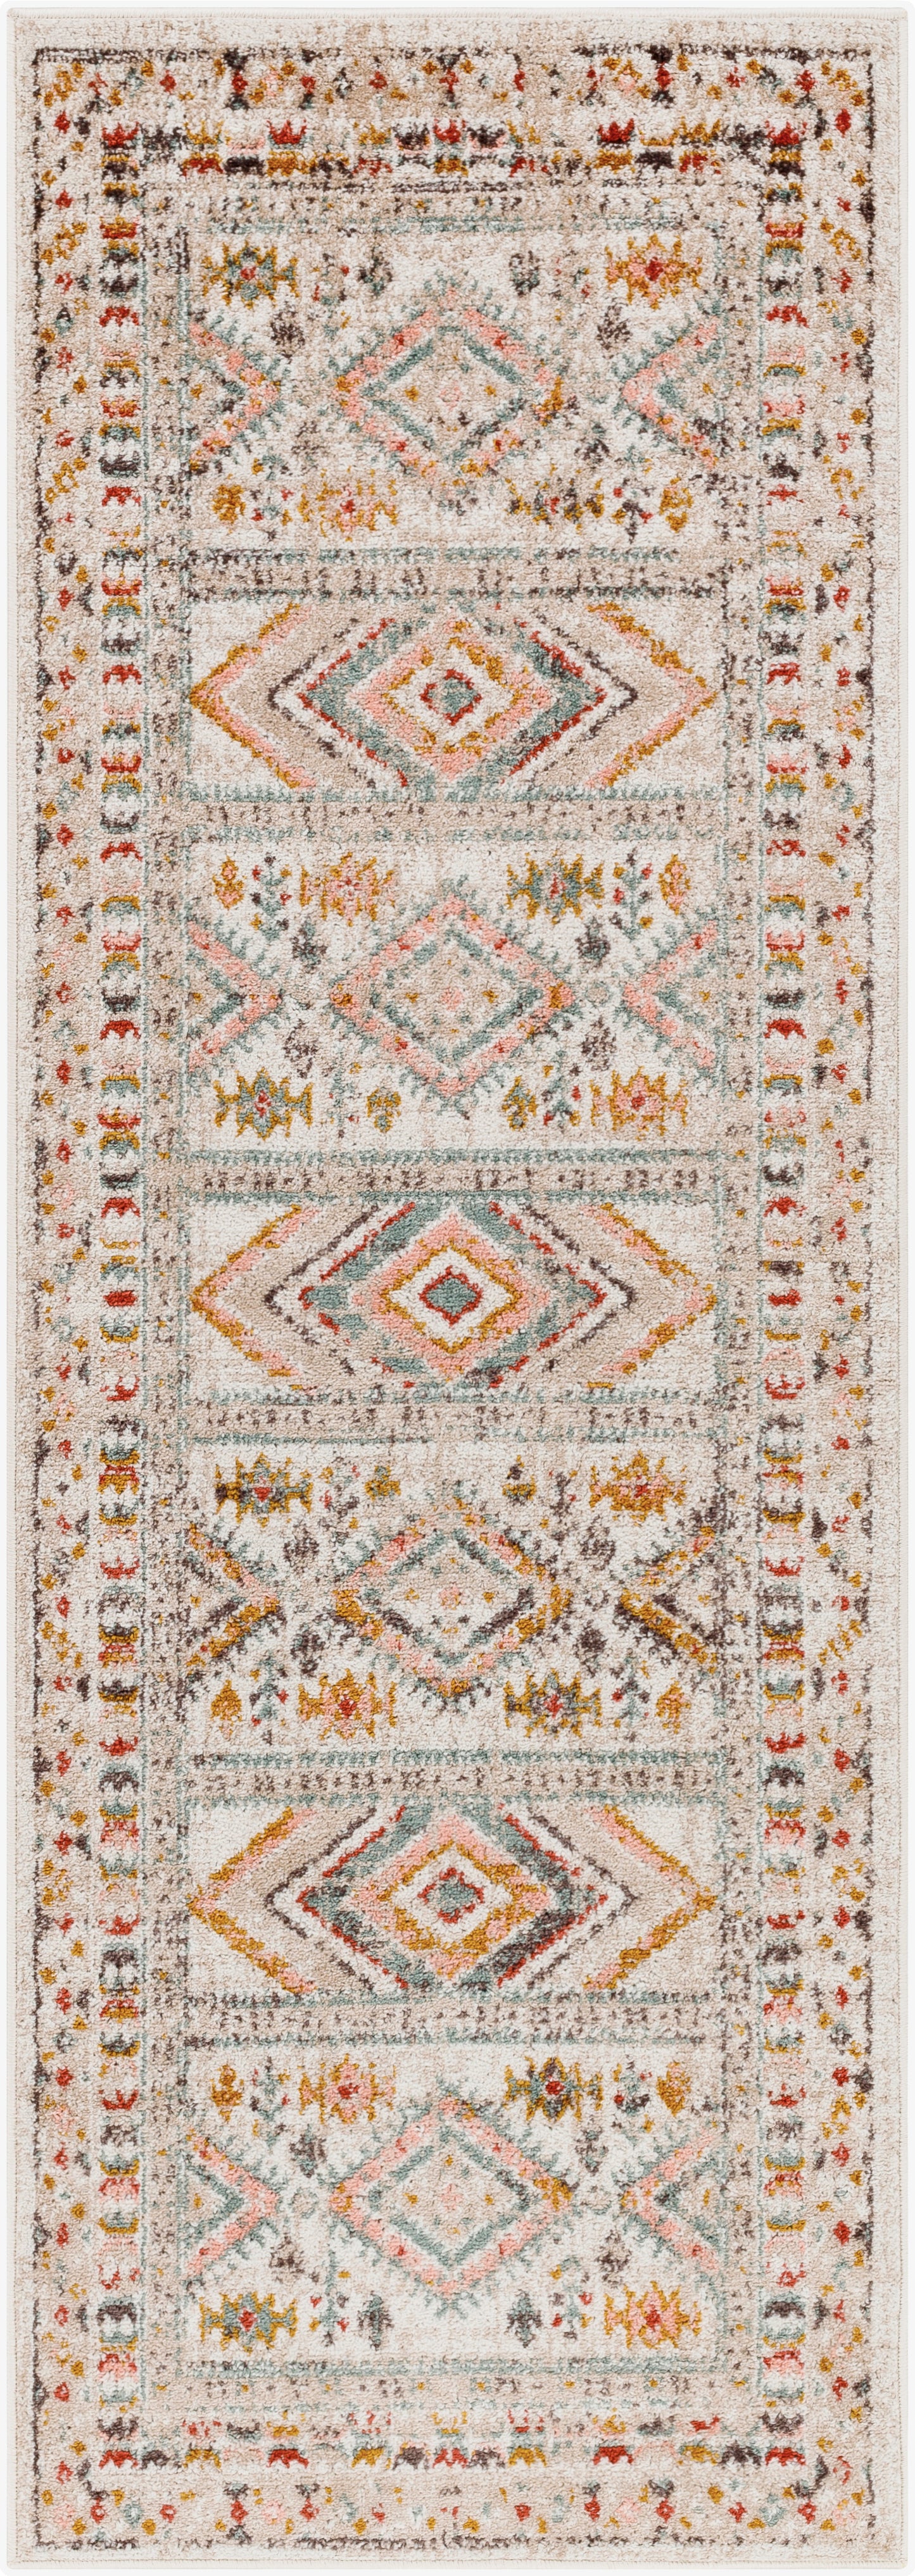 Ankara 26371 Machine Woven Synthetic Blend Indoor Area Rug by Surya Rugs